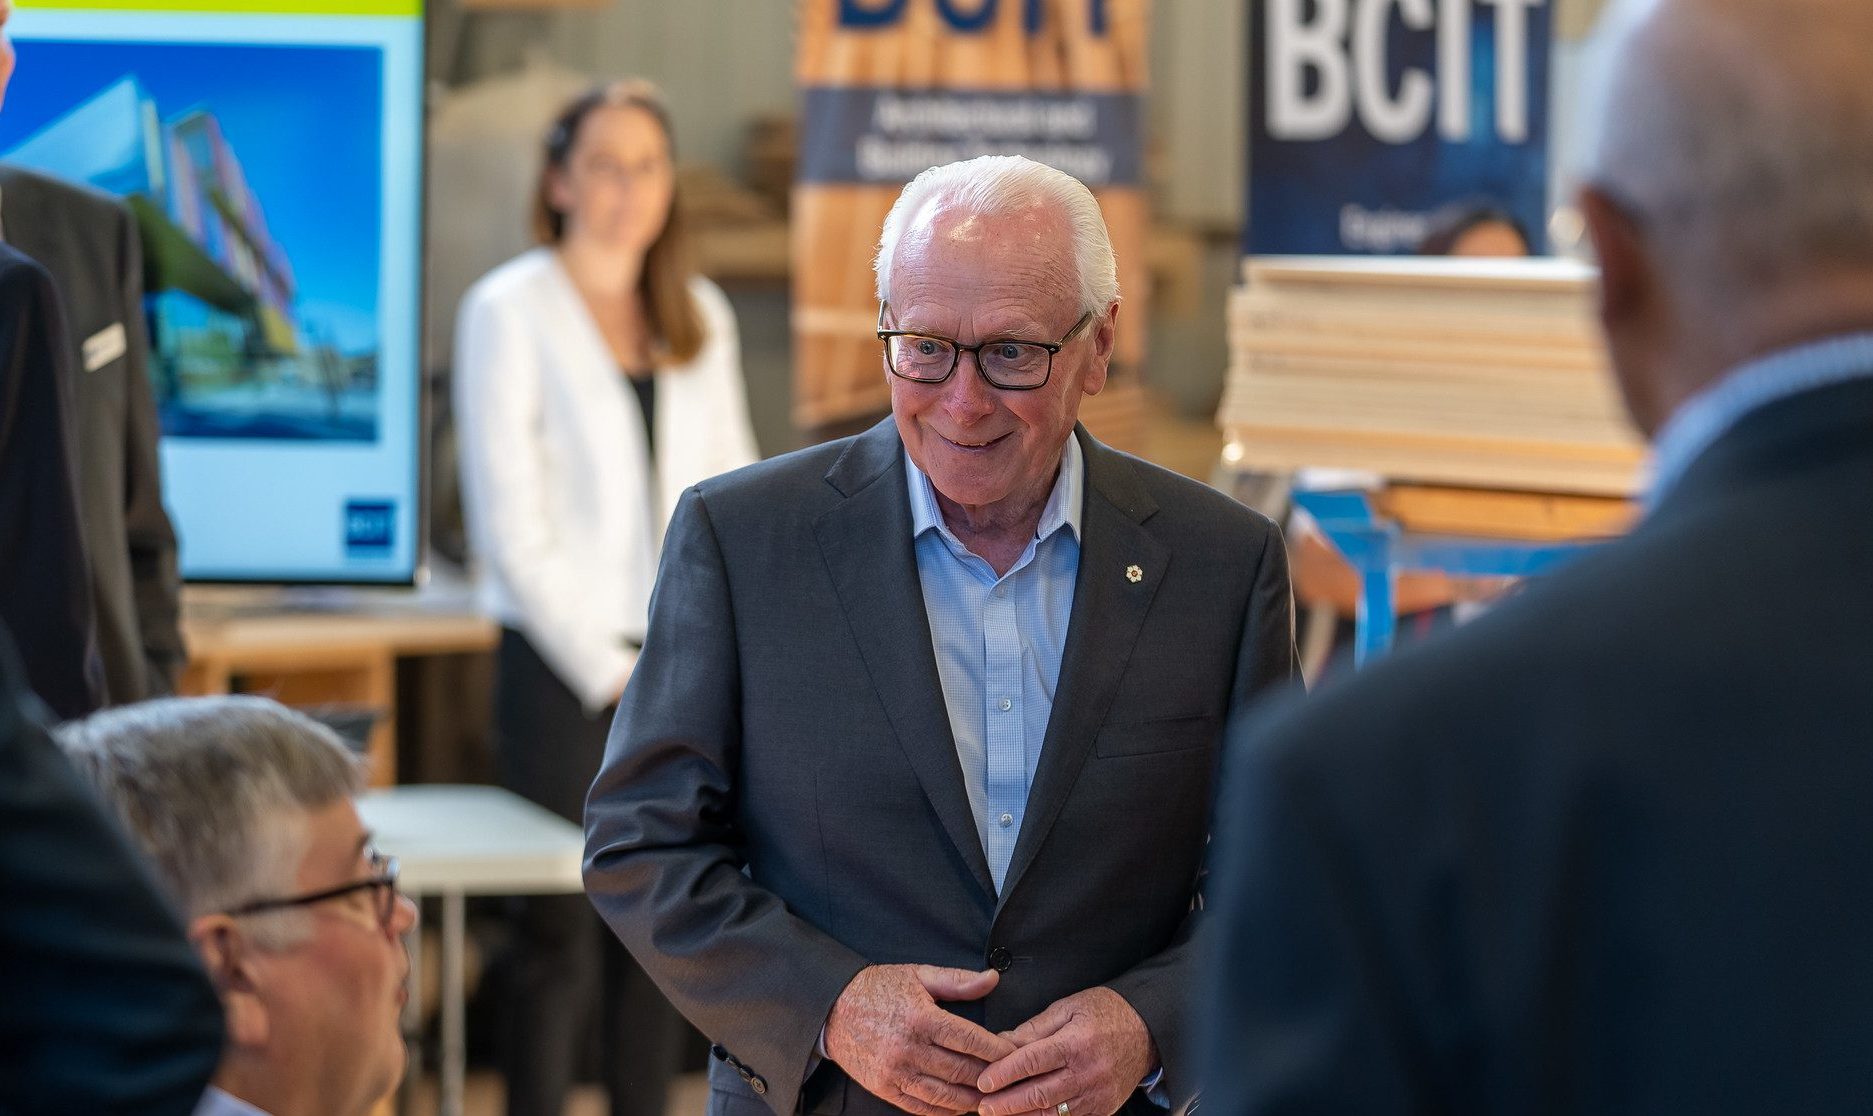 An image of a man in BCIT